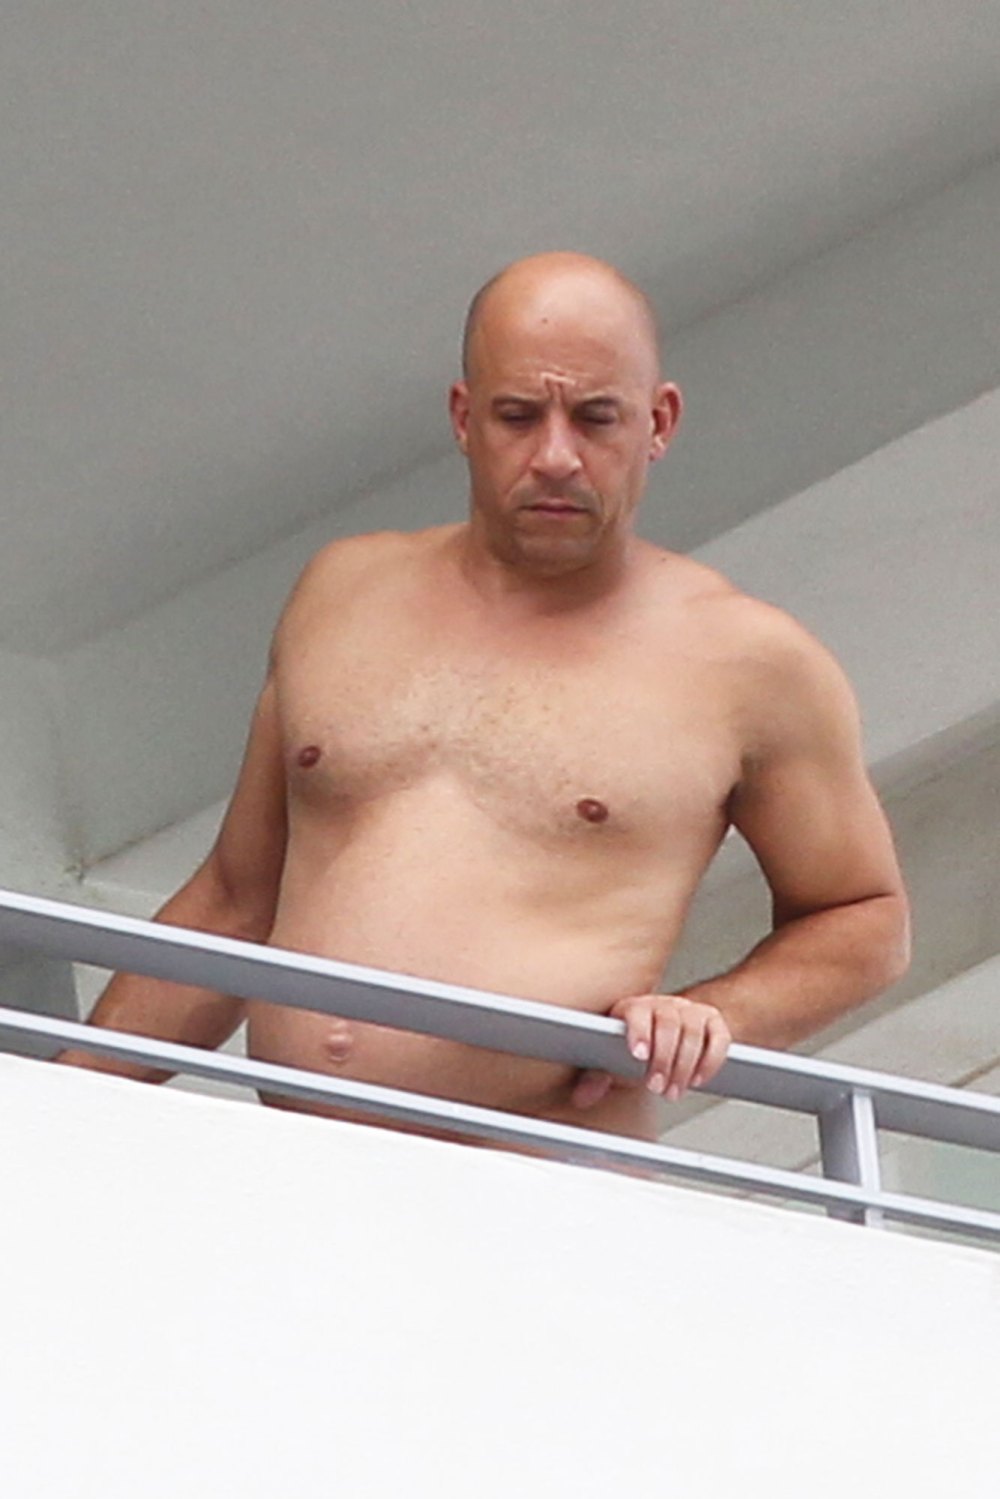 Vin Diesel Goes Shirtless, Showcases Softer Figure: Photo